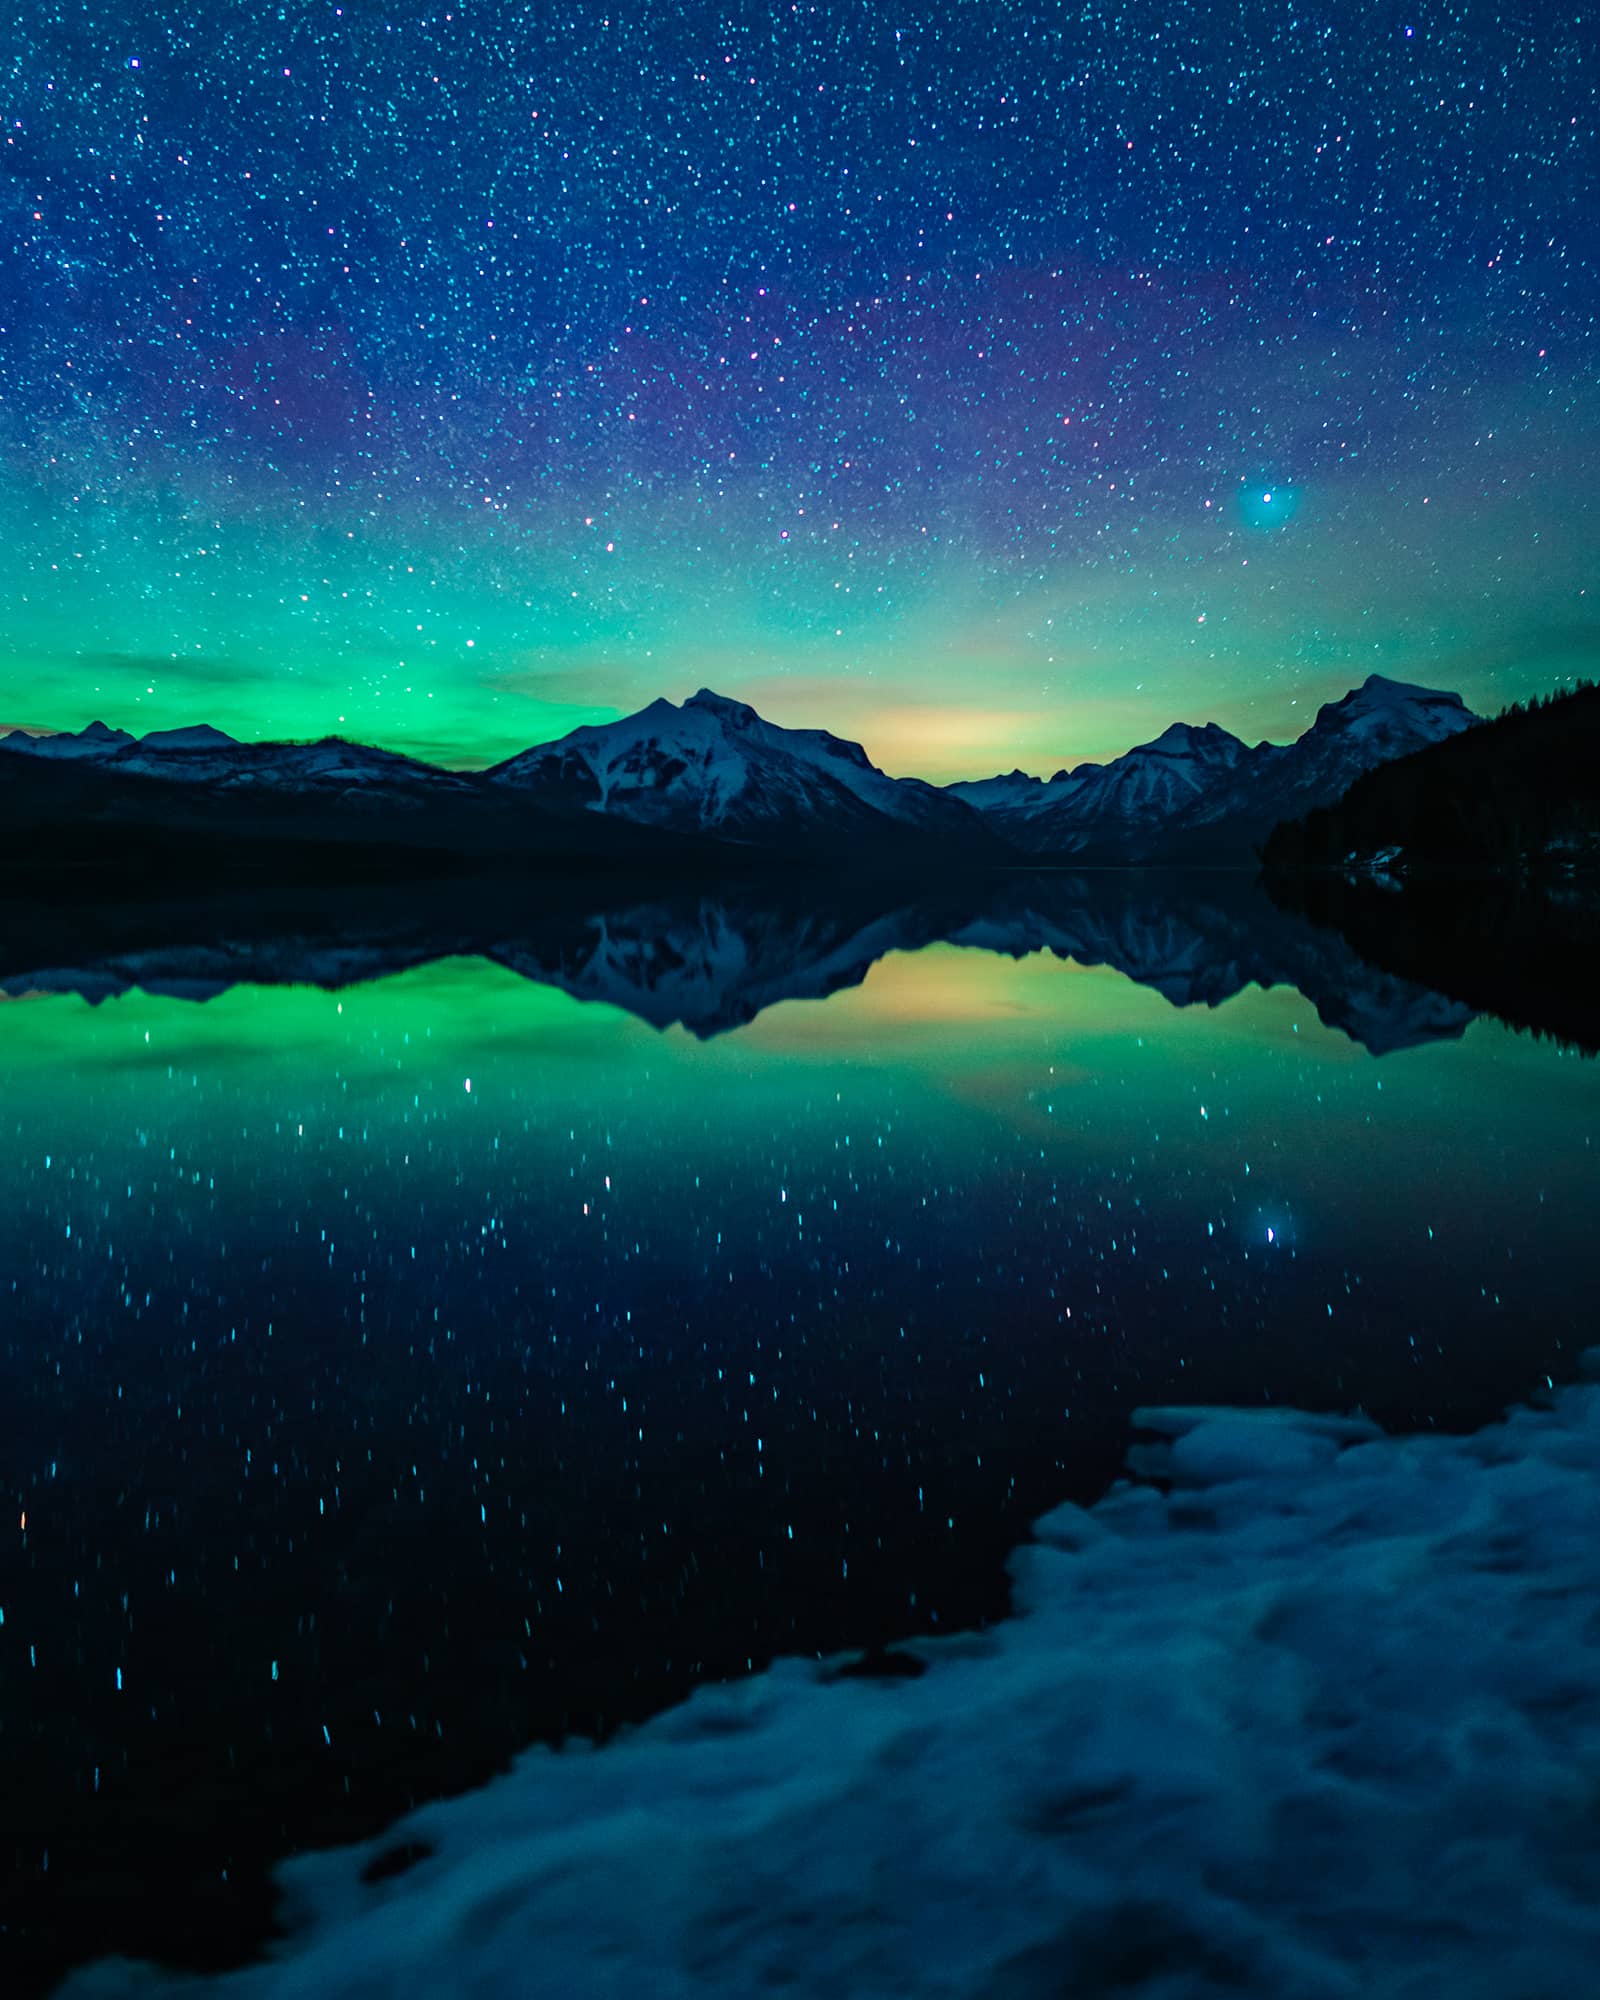 galaxy stars over mountains and lake at night